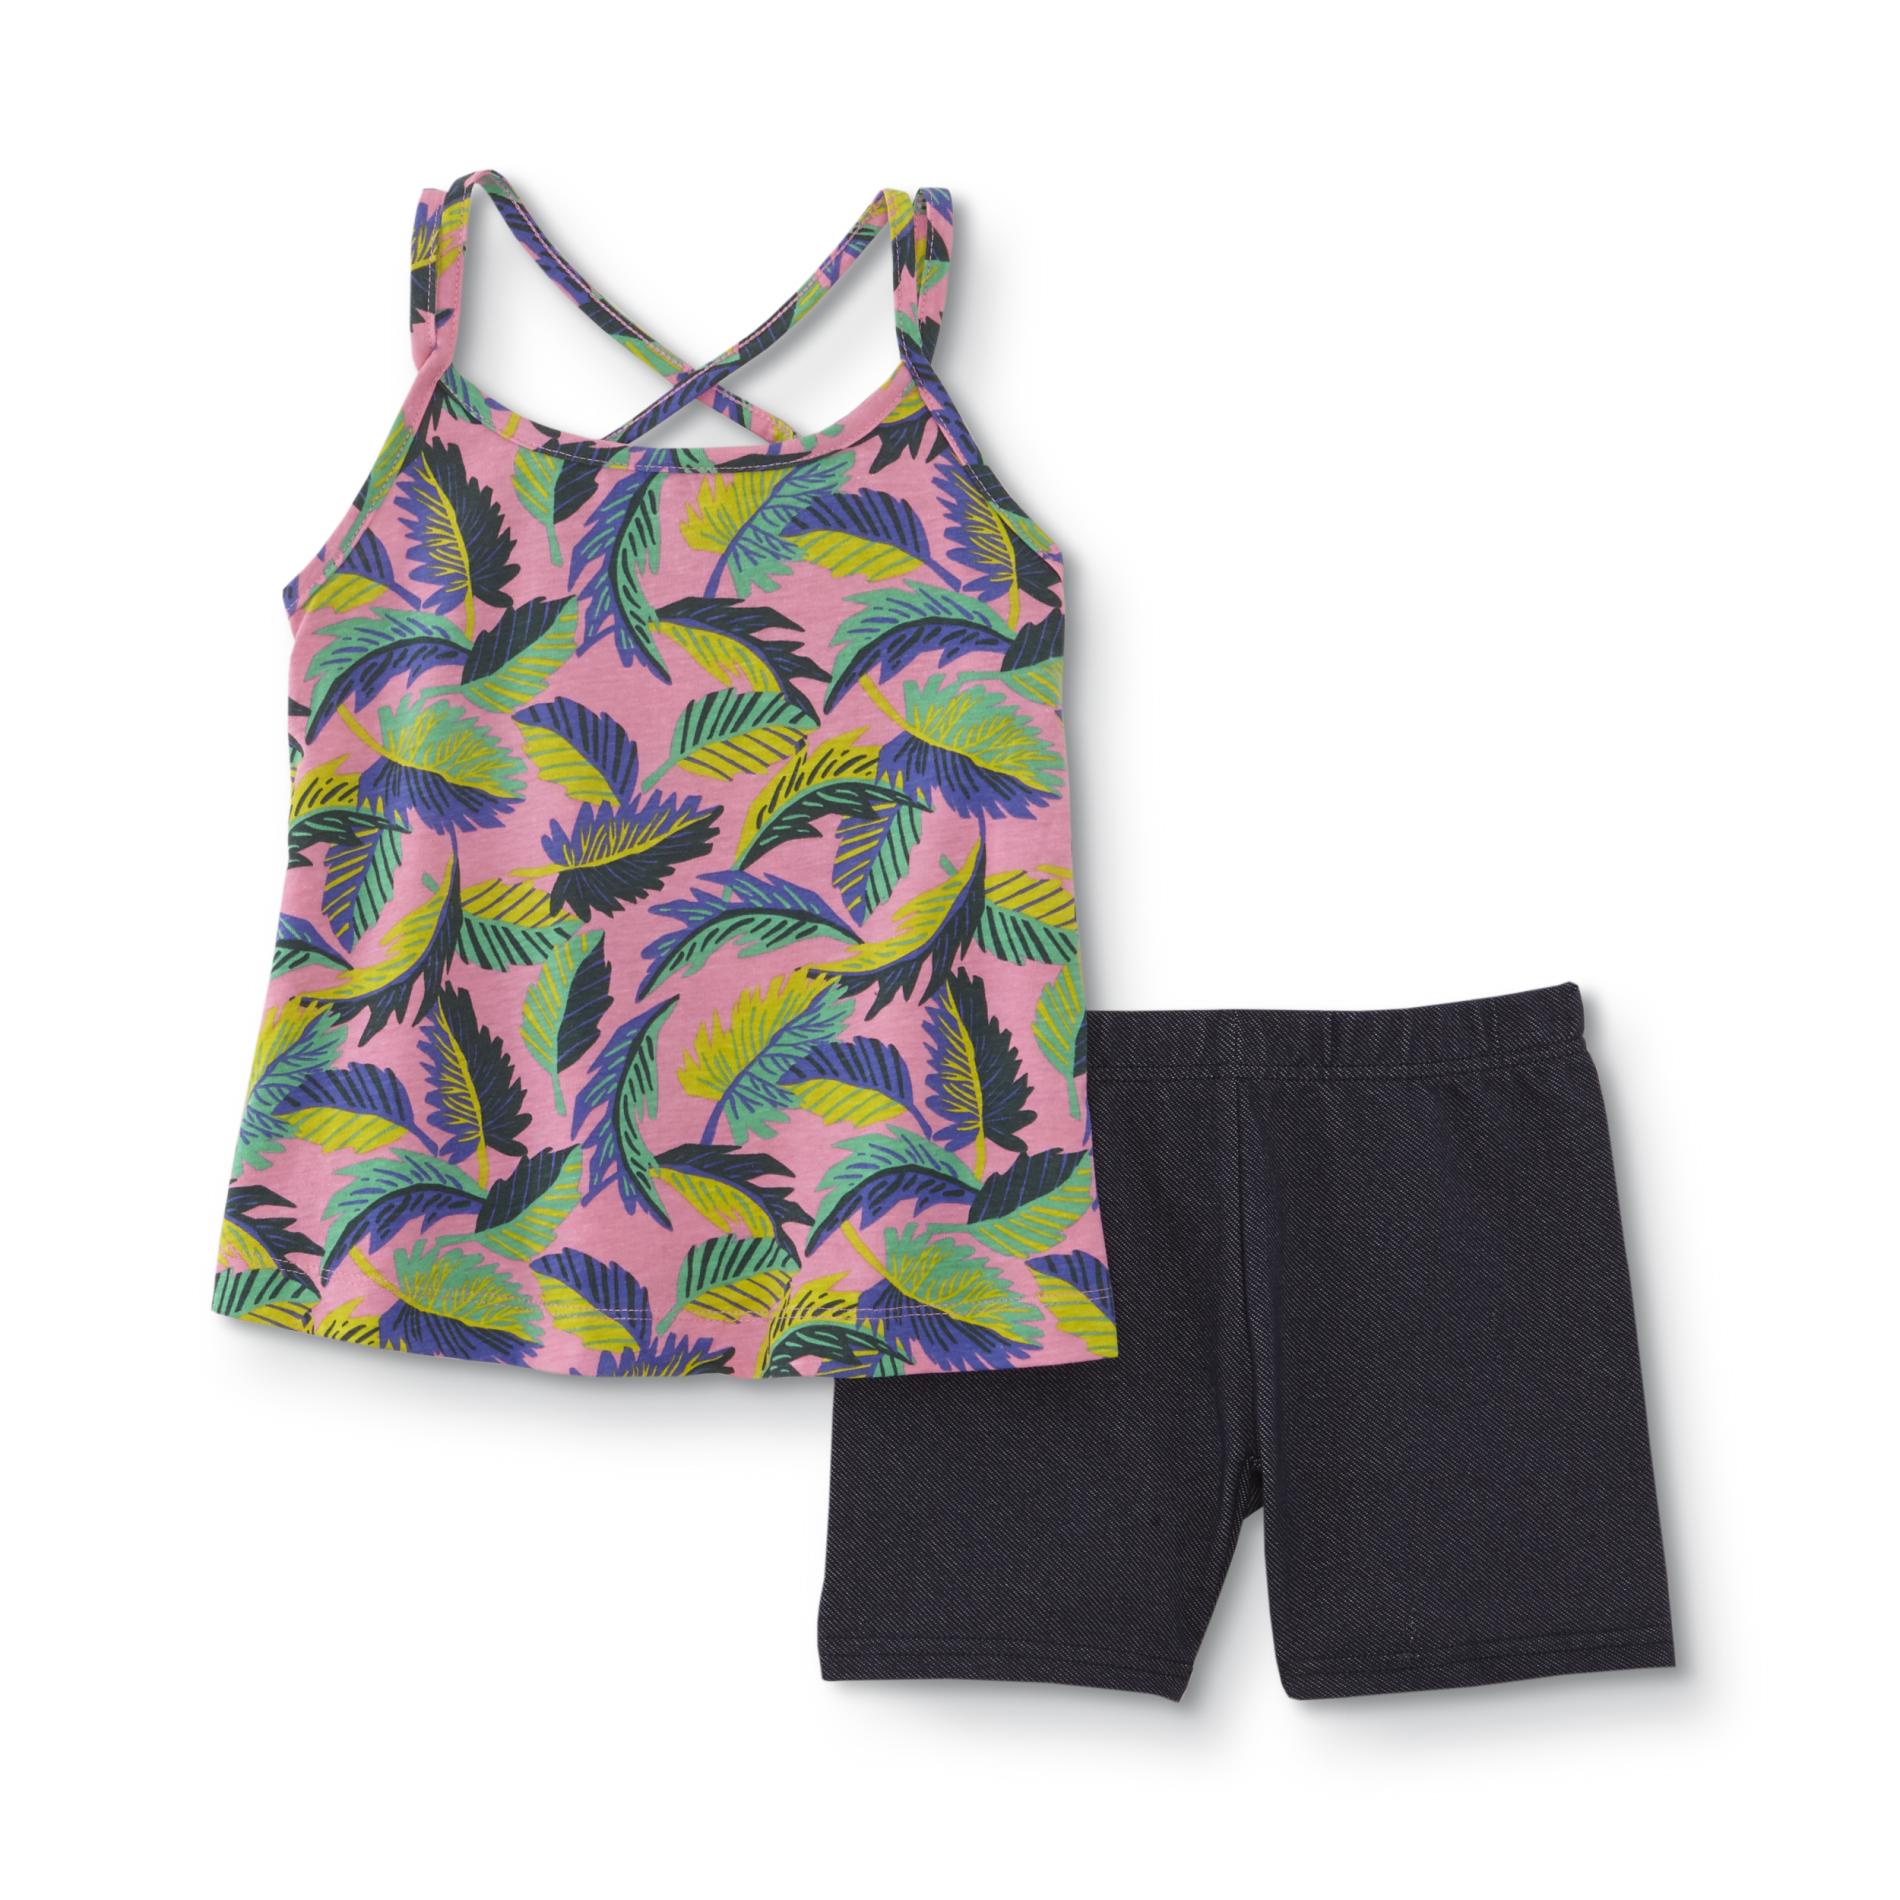 Simply Styled Girls' Tank Top & Shorts - Palm Leaves